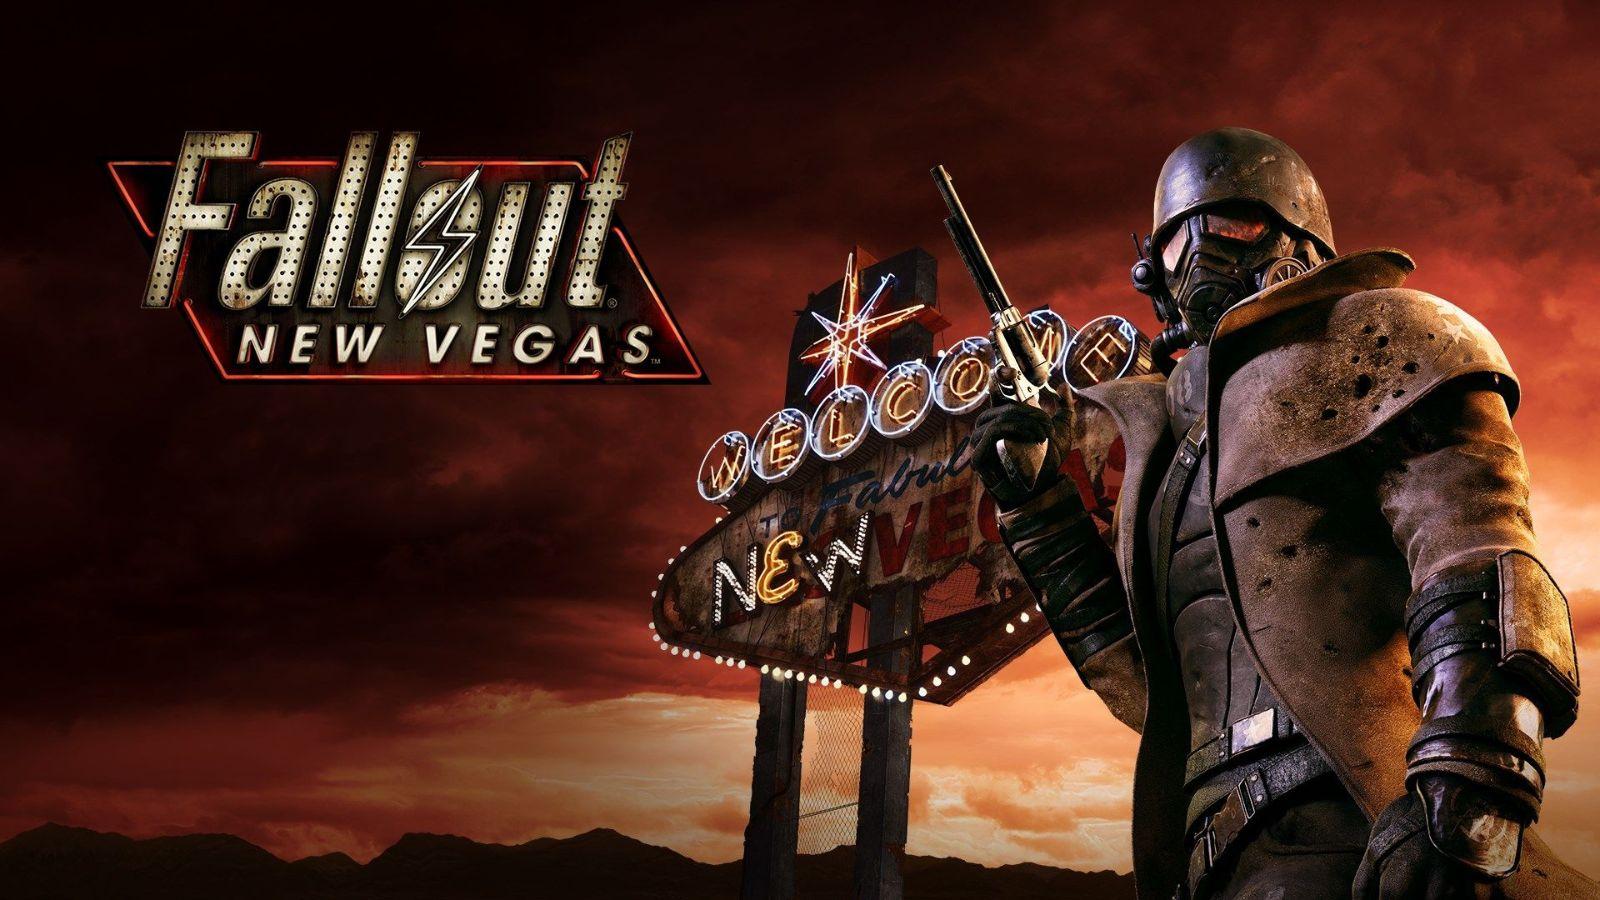 Fallout: New Vegas Dev Would Love To Make Another Fallout Game - GameSpot